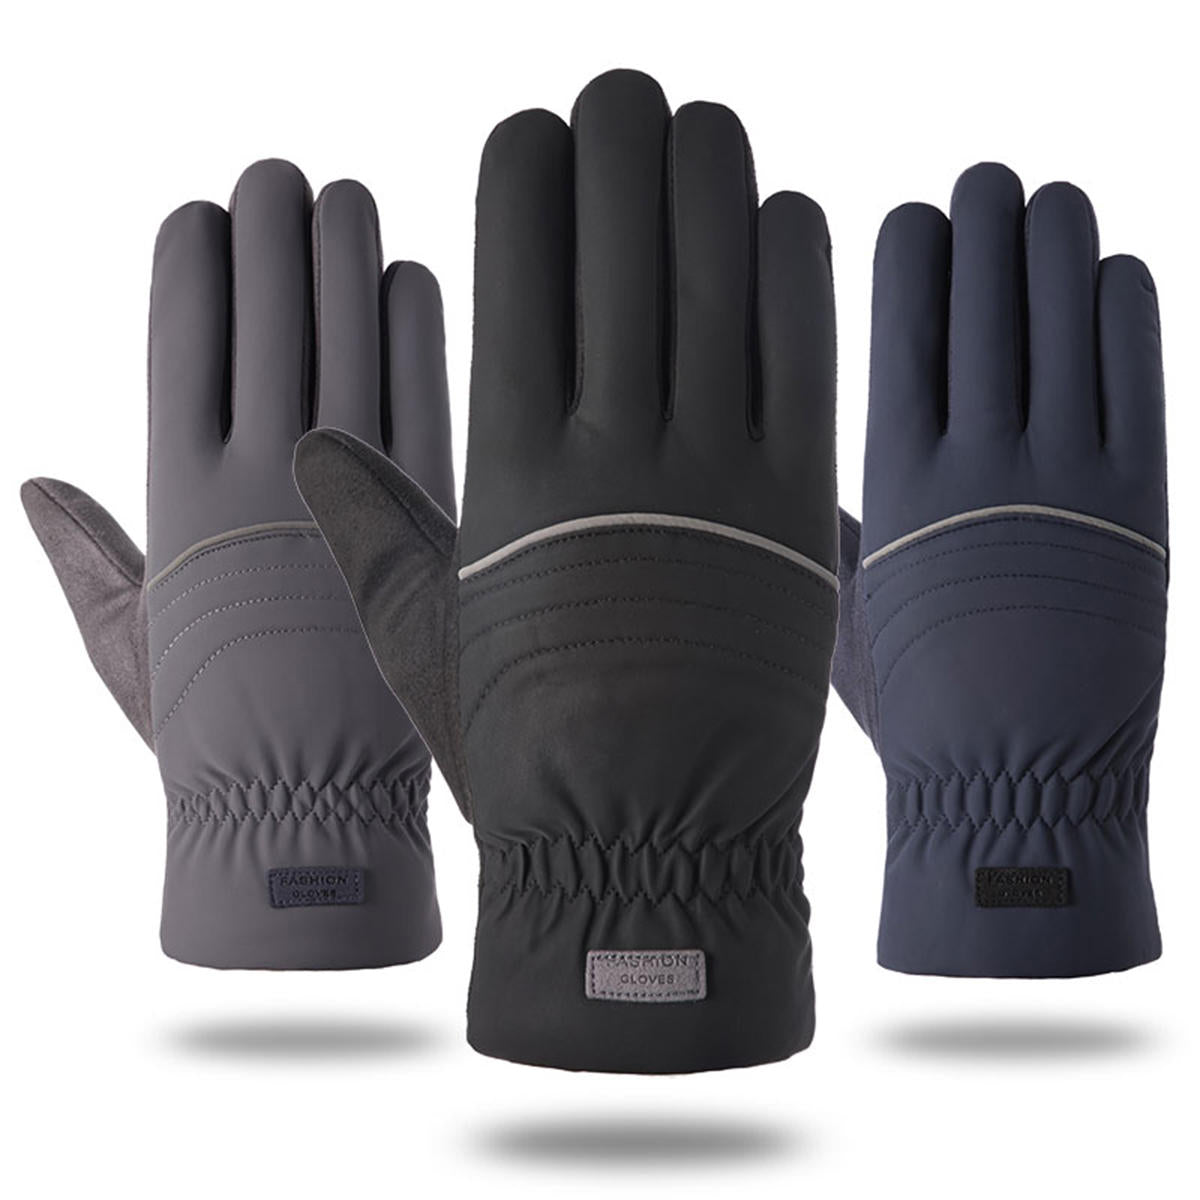 Waterproof Winter Warm Thermal Gloves Ski Snow Snowboard Cycling Touch Screen